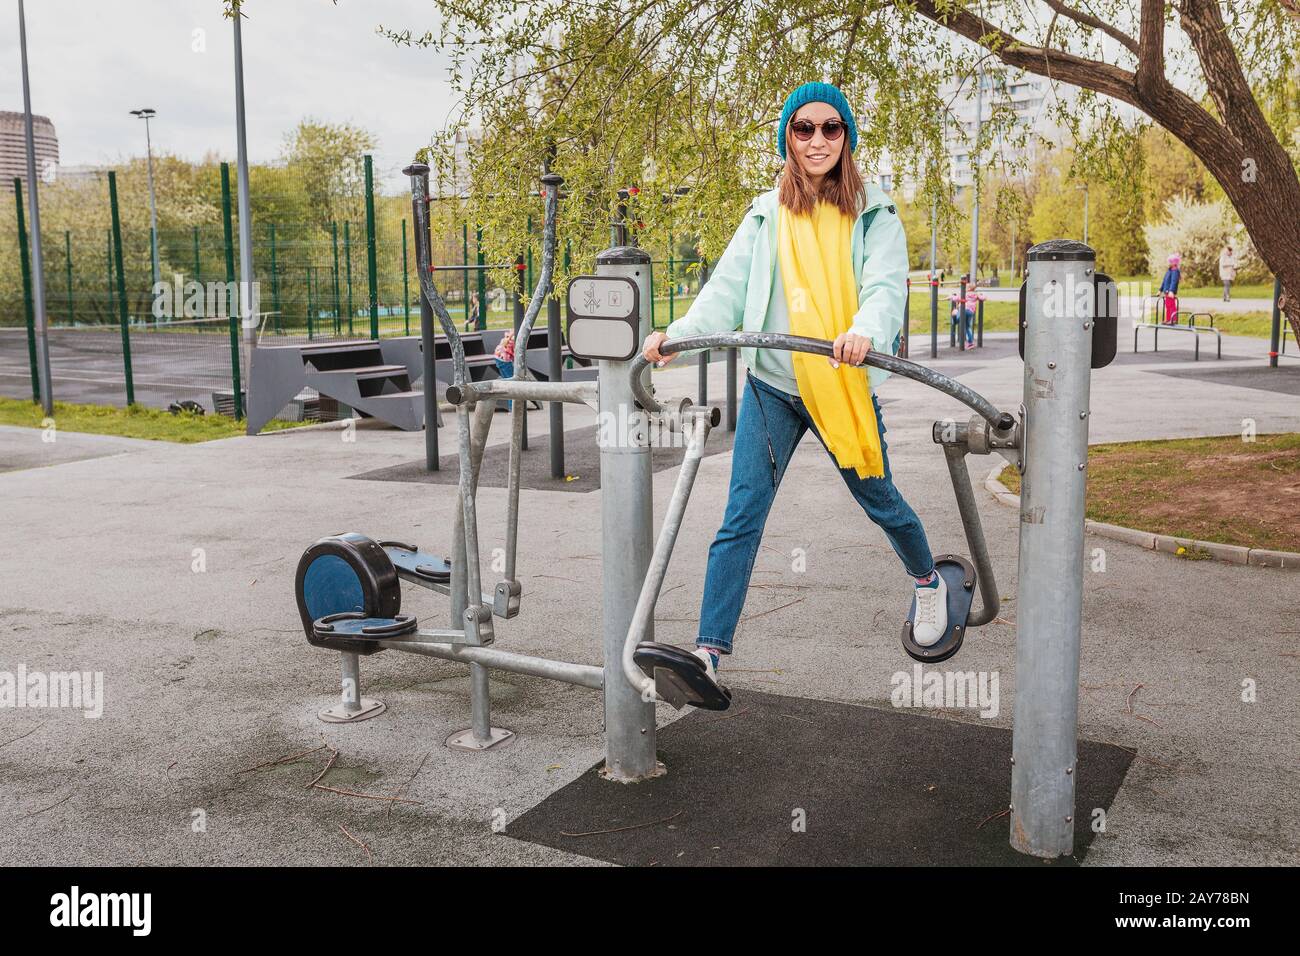 Woman Exercising At Outdoors Gym Playground Equipment Stock Photo